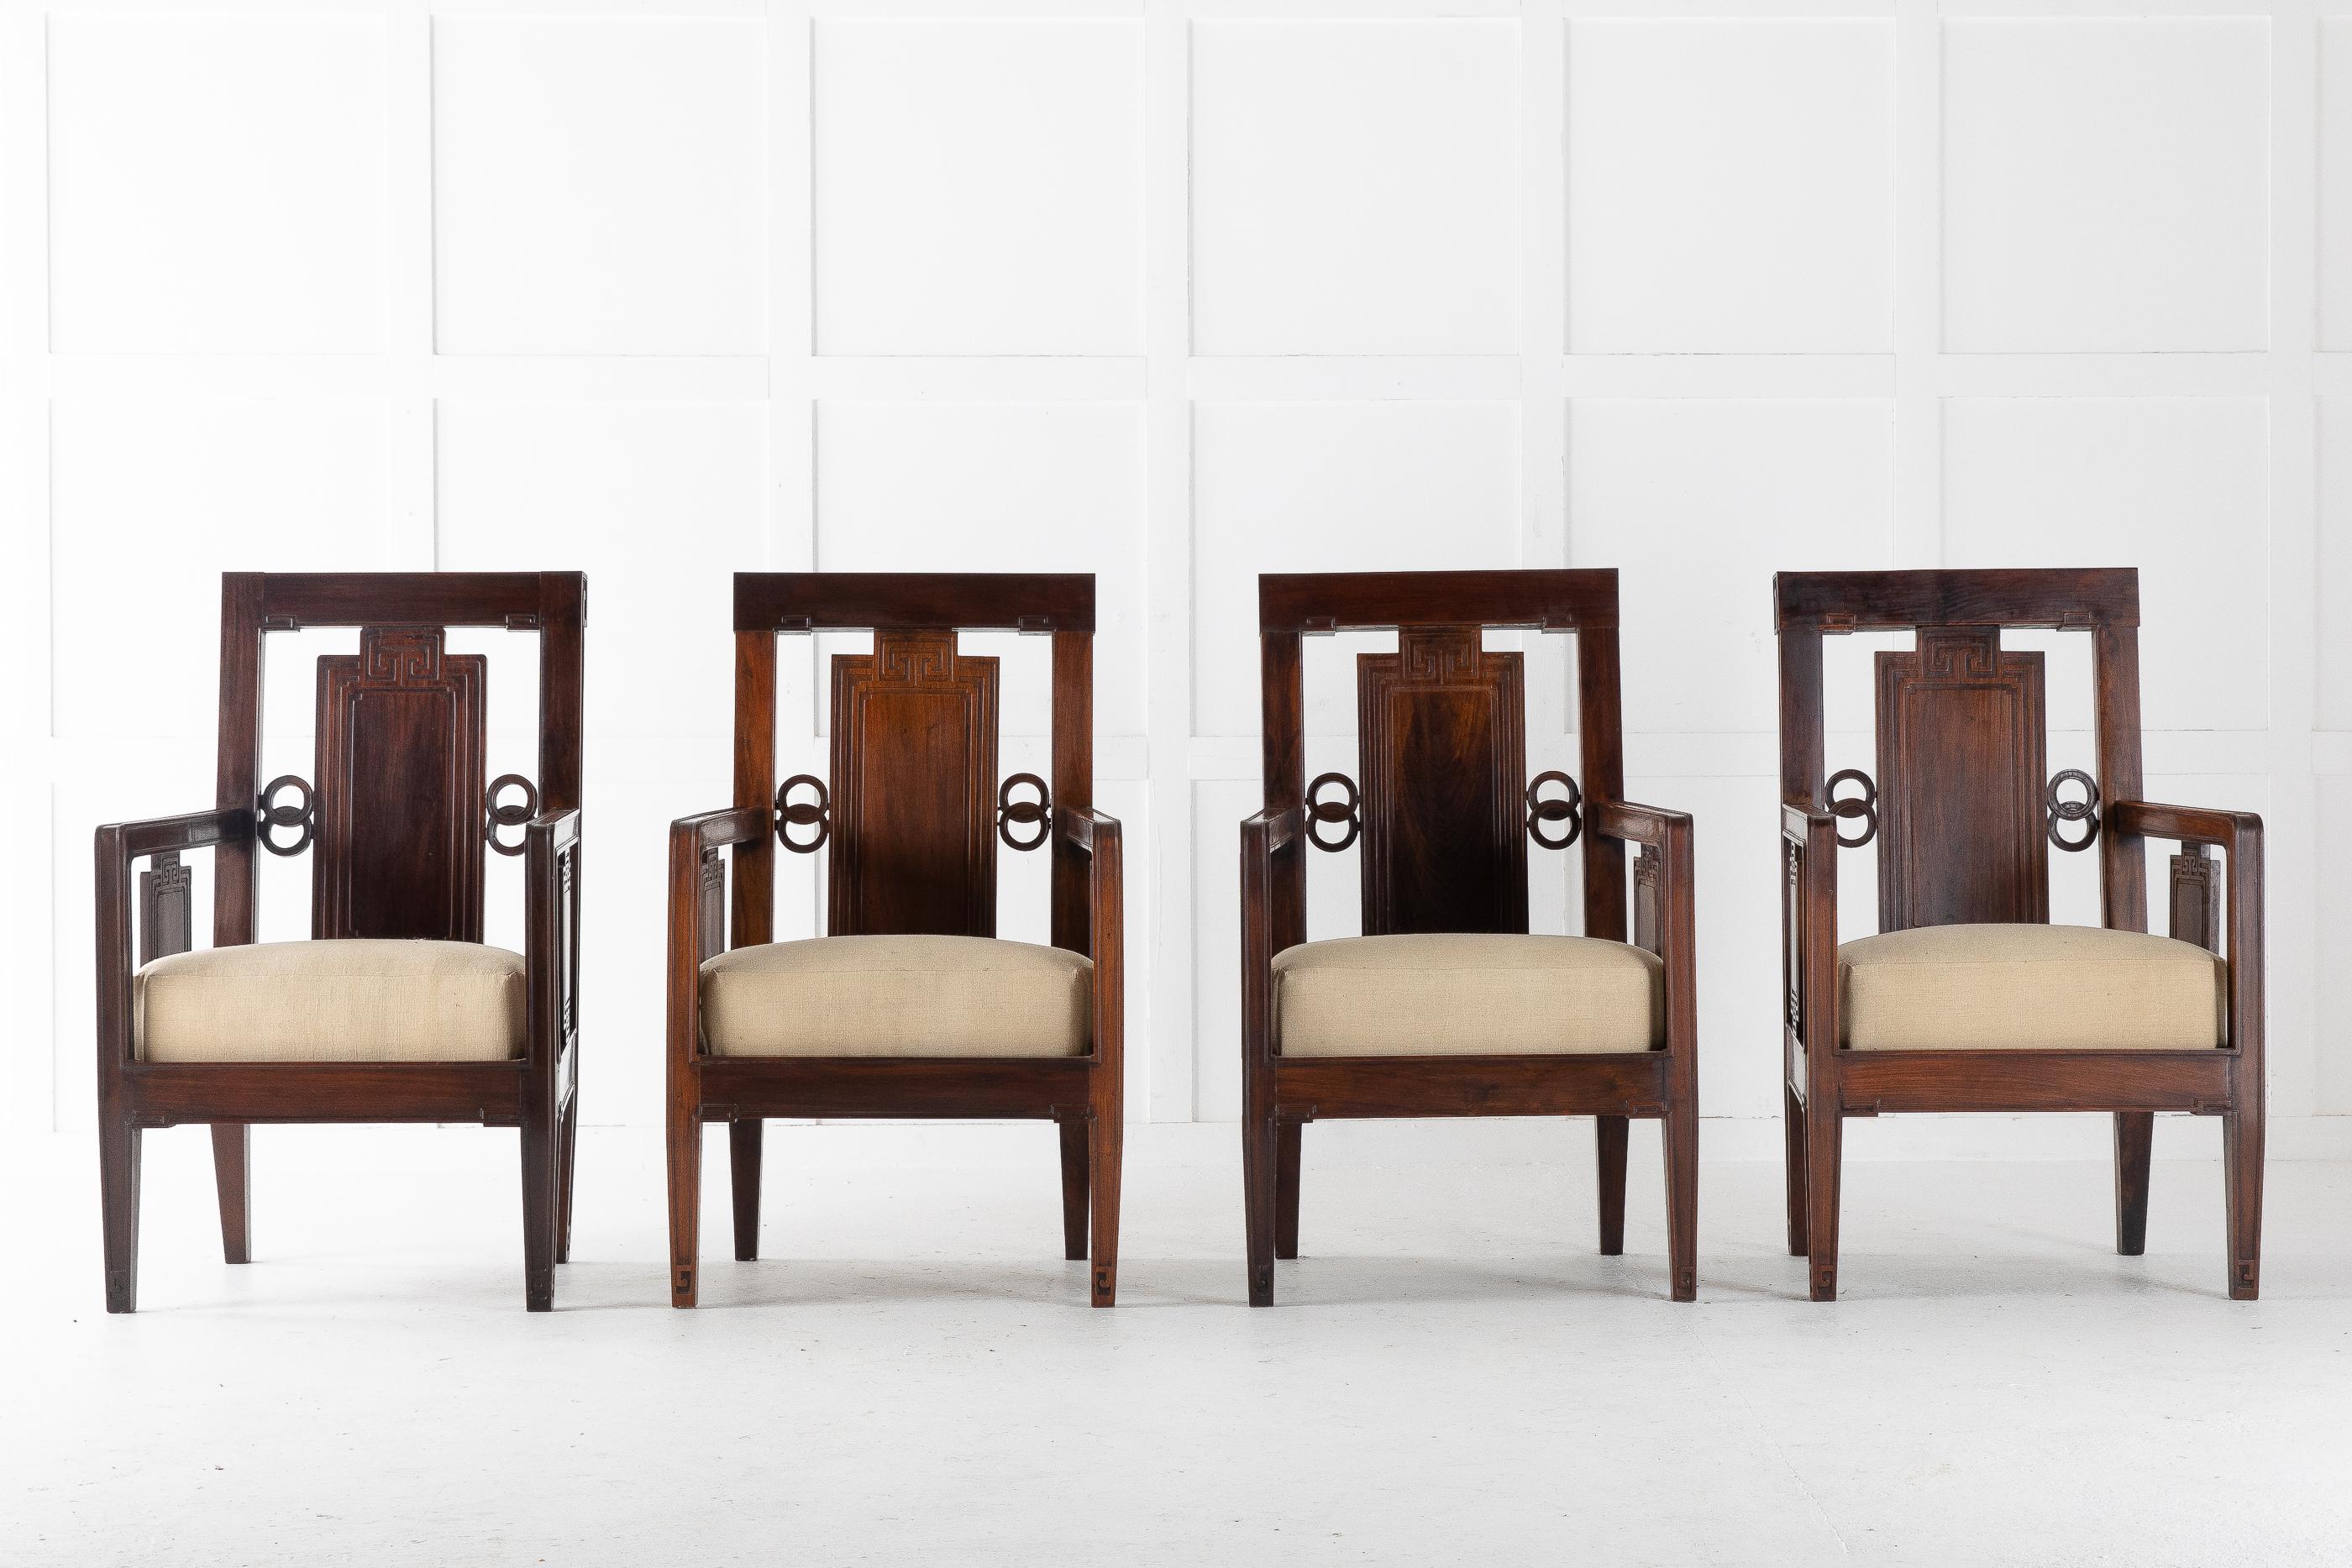 1940s very stylish Chinese, rosewood chairs made for the western market. Very contemporary design. Excellent quality heavy chairs.